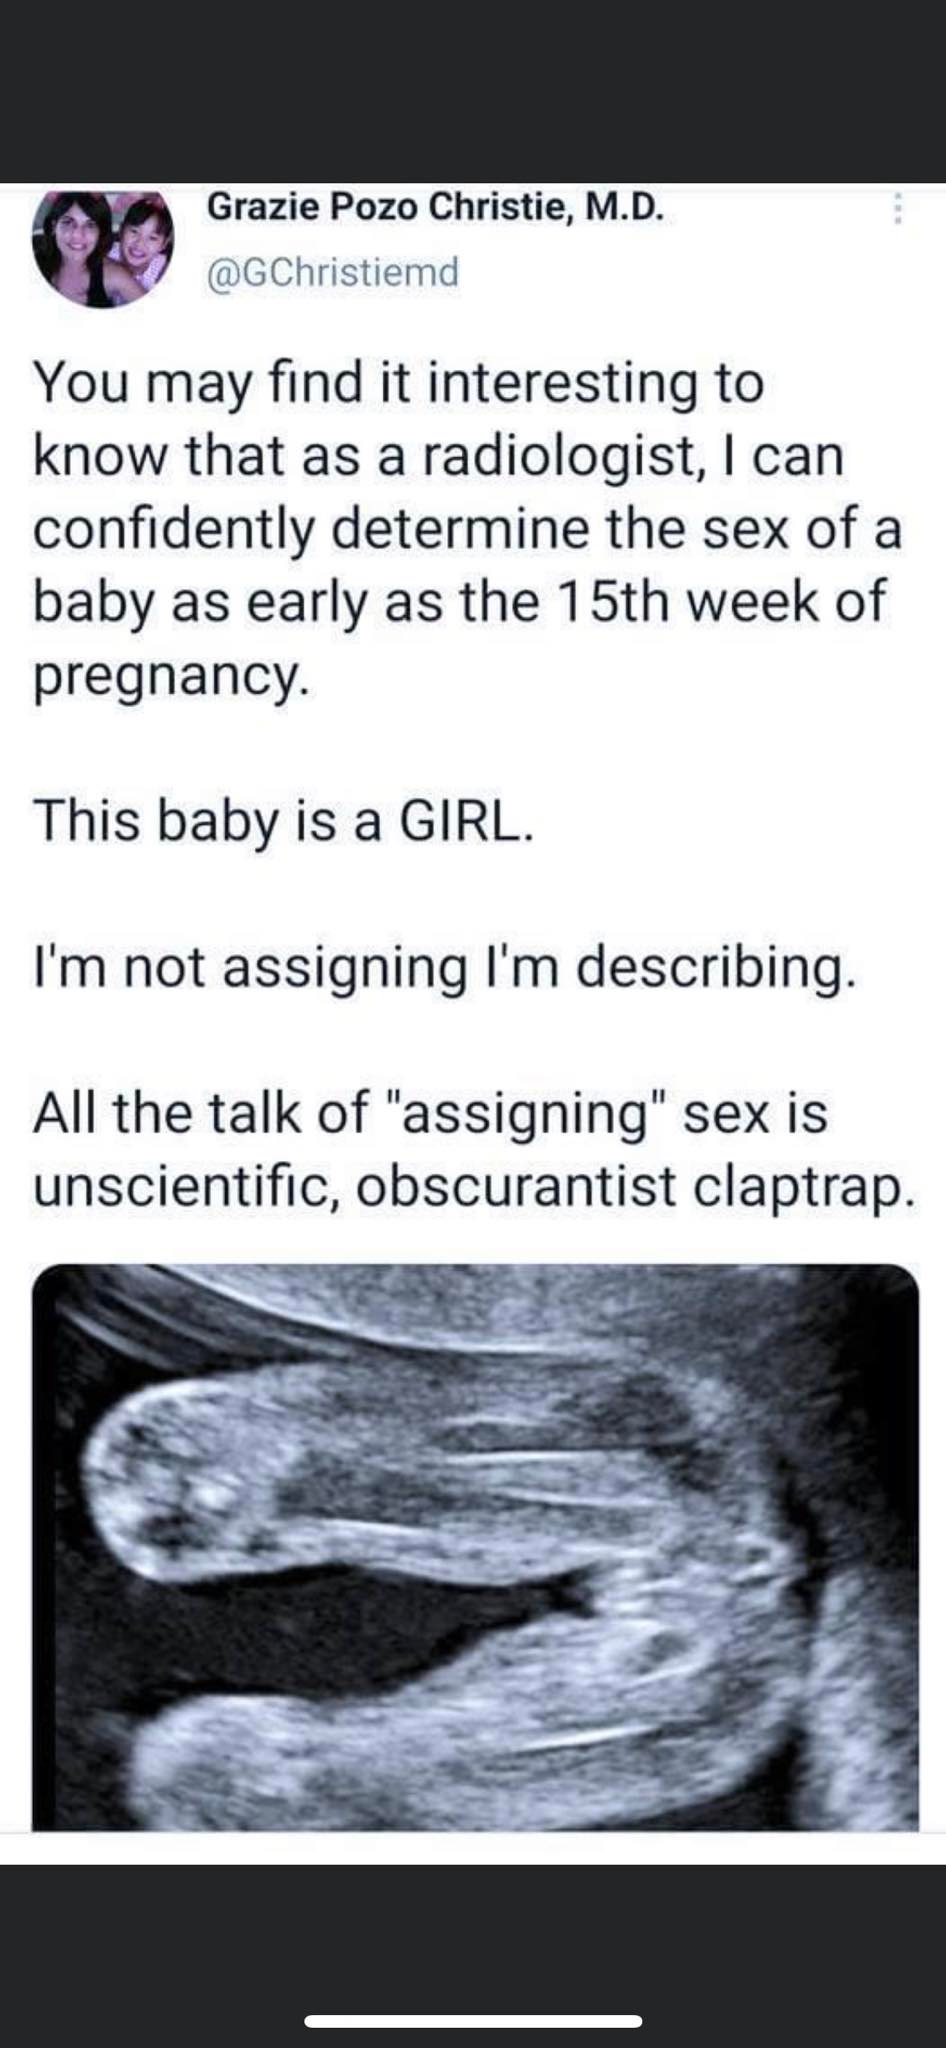 May be an image of text that says 'Grazie Pozo Christie, M.D. @GChristiemd You may find it interesting to know that as a radiologist, can confidently determine the sex of a baby as early as the 15th week of pregnancy. This baby is a GIRL. I'm not assigning I'm describing. All the talk of "assigning" sex is unscientific, obscurantist claptrap.'